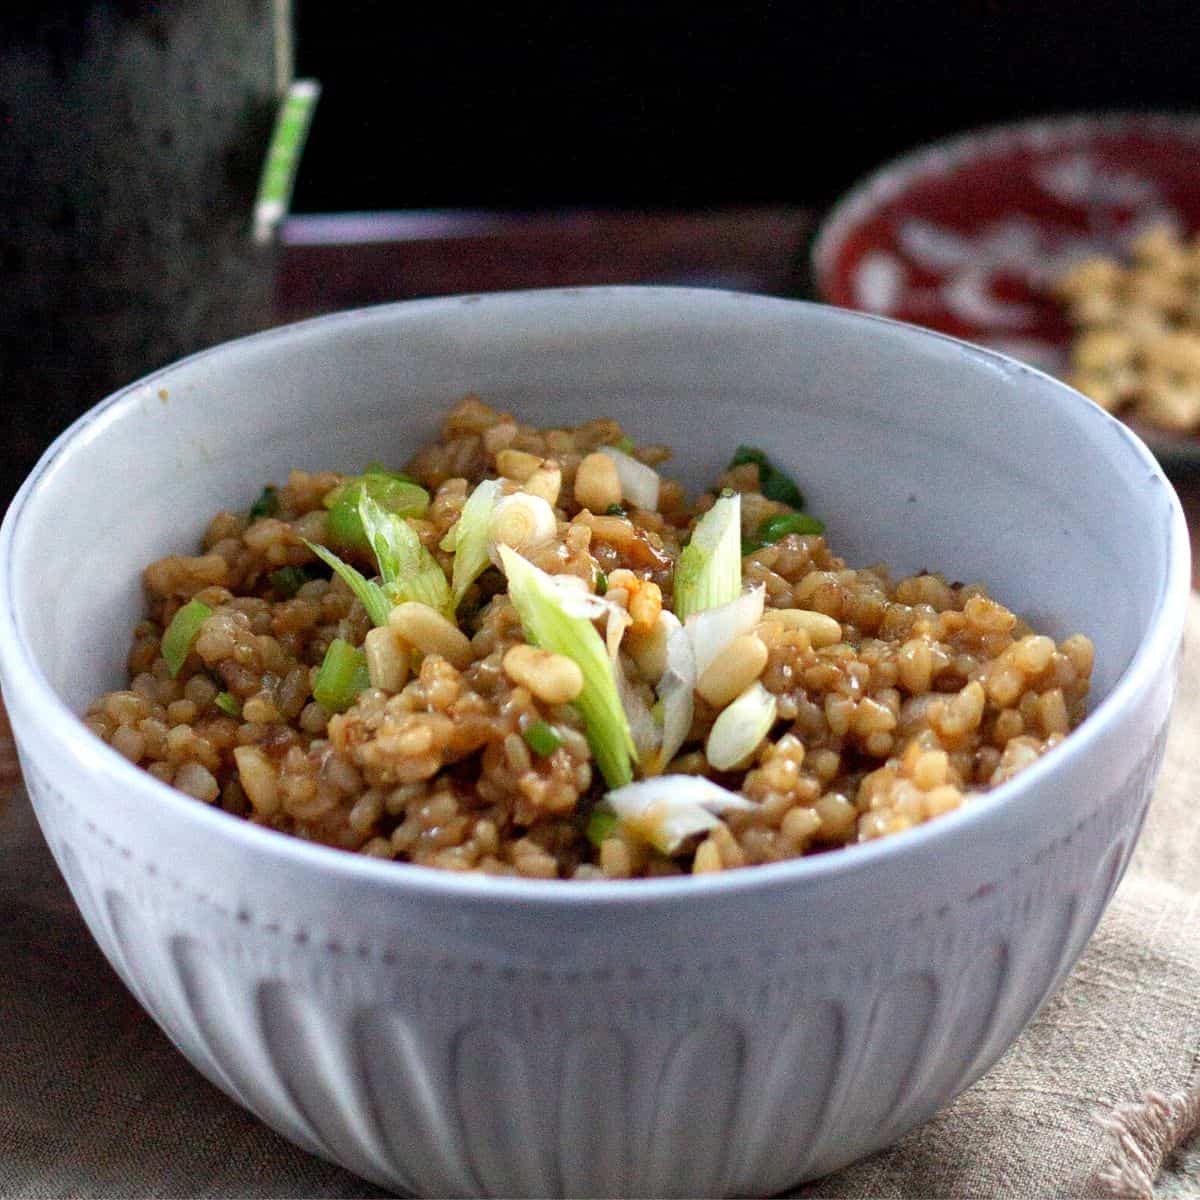 Matsunoma brown rice in a bowl with spring onions